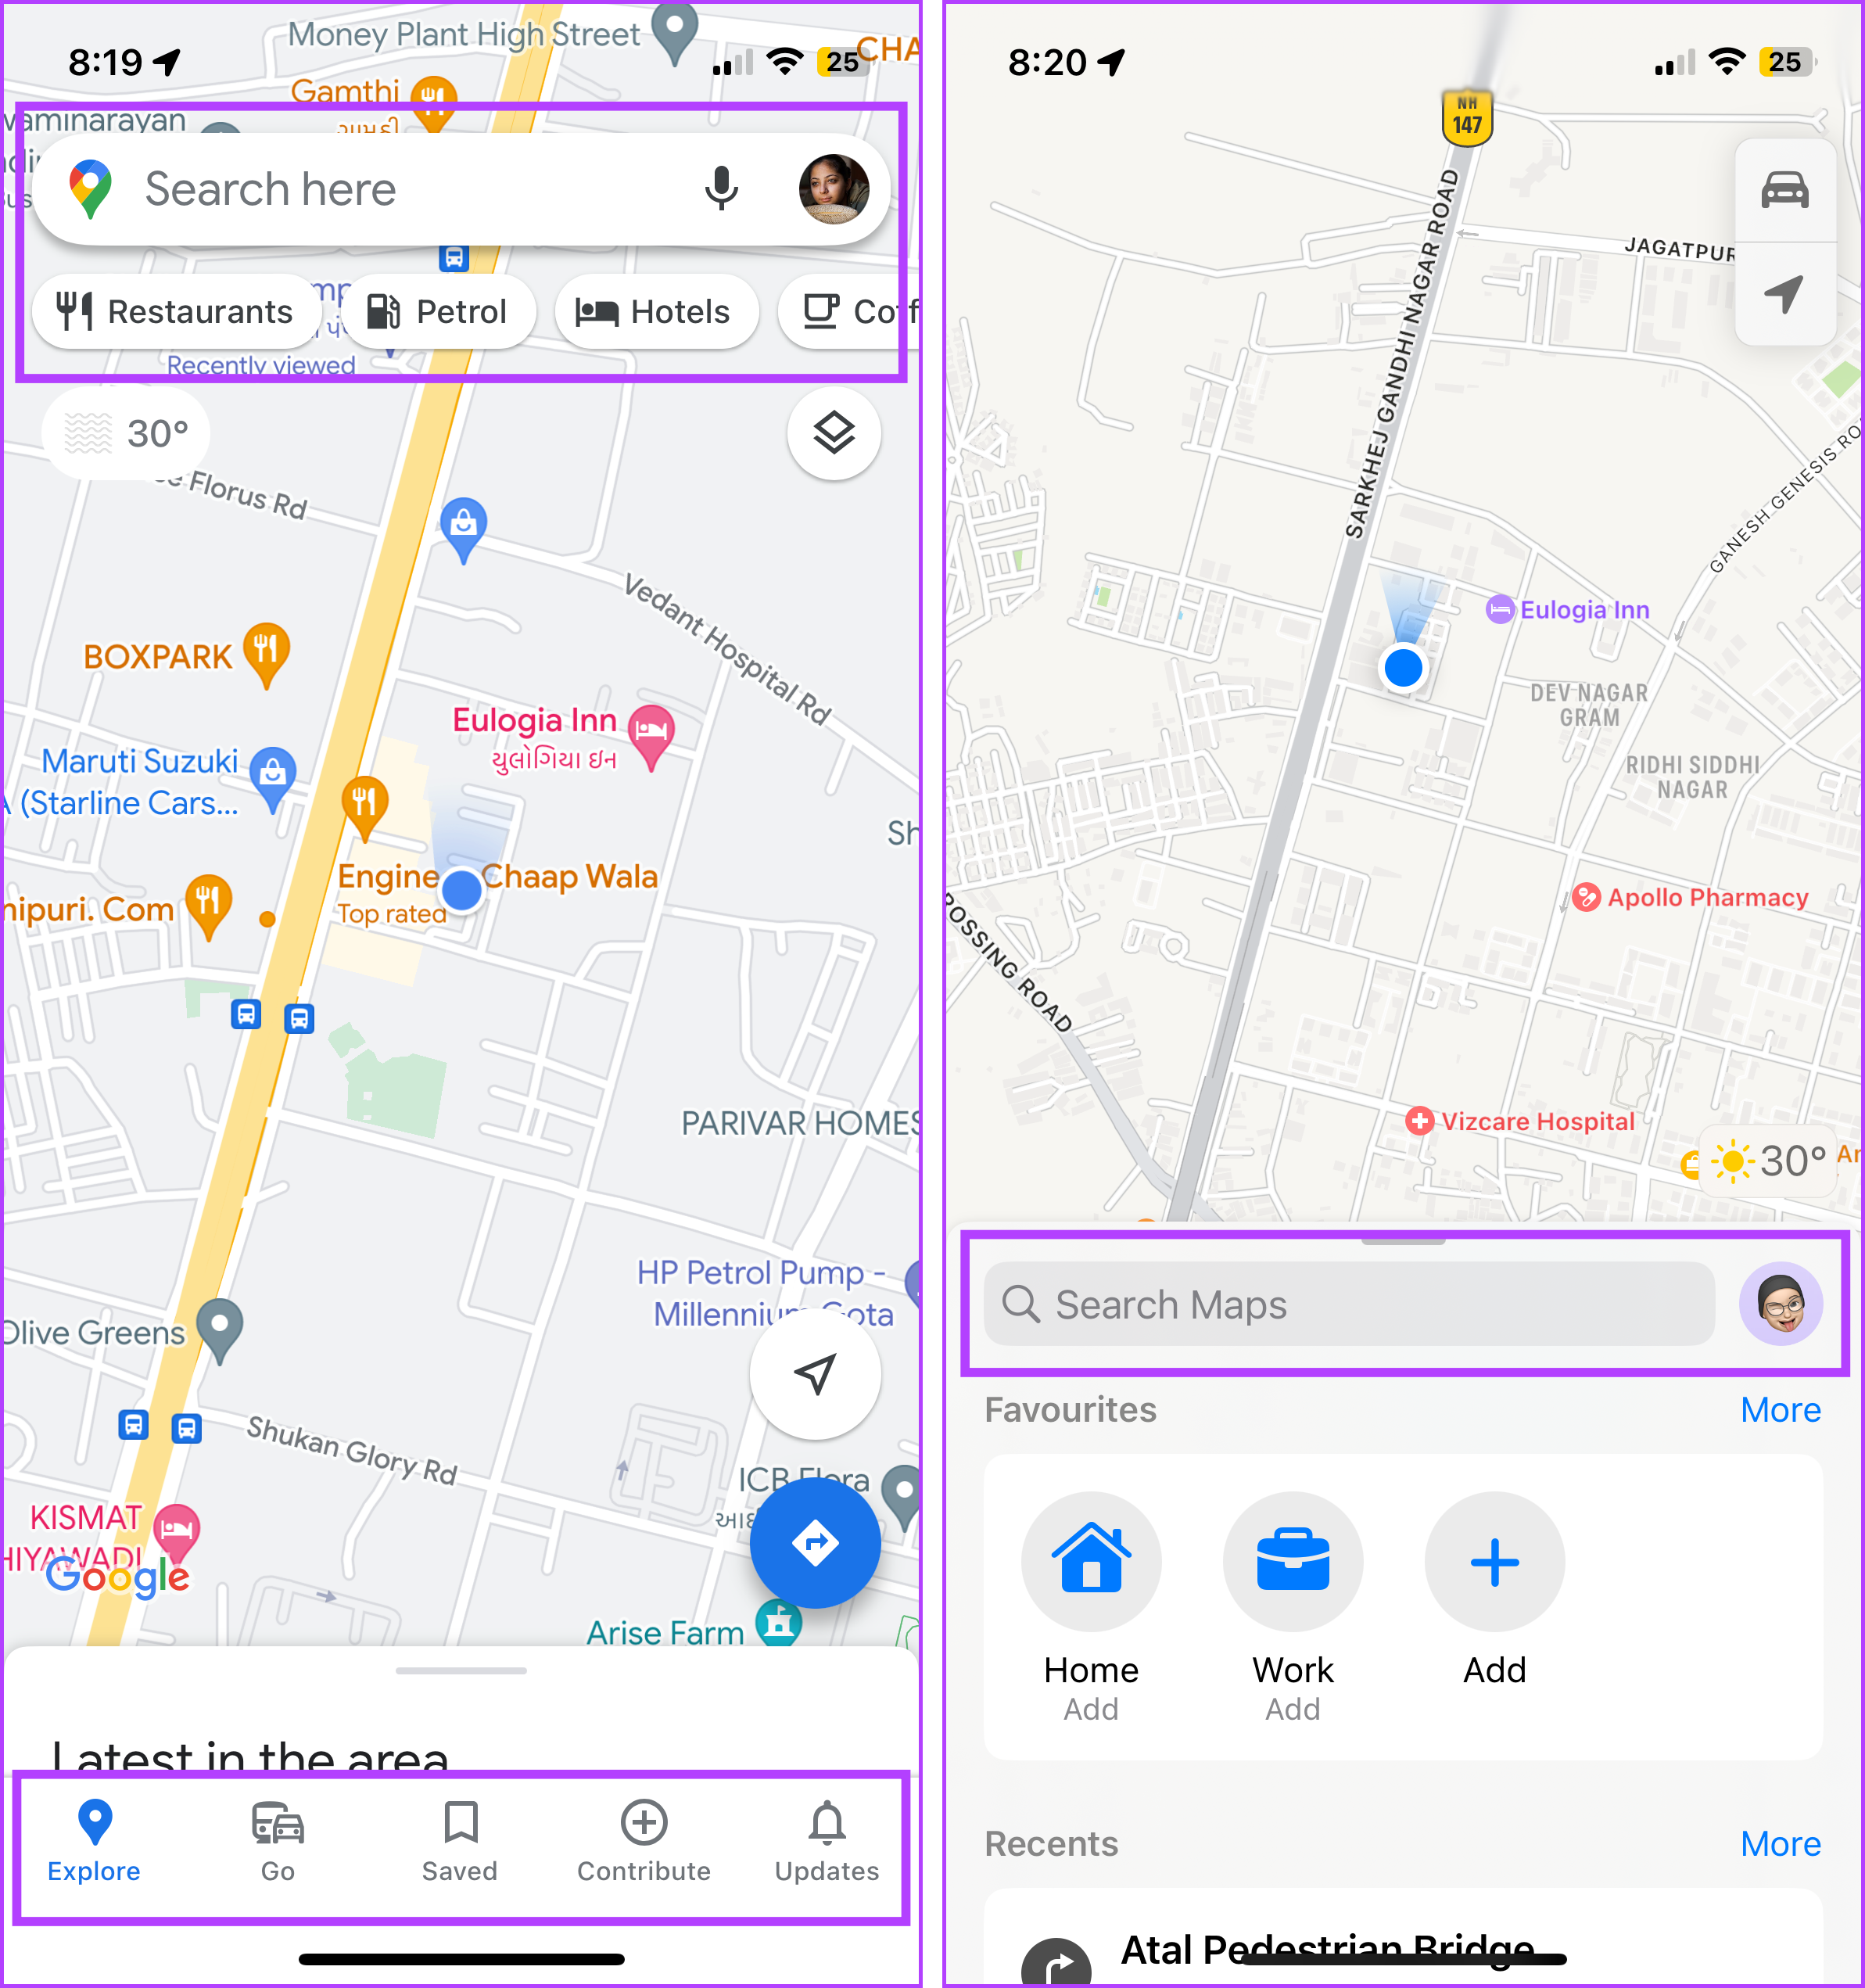 UI of Google Maps and Apple Maps